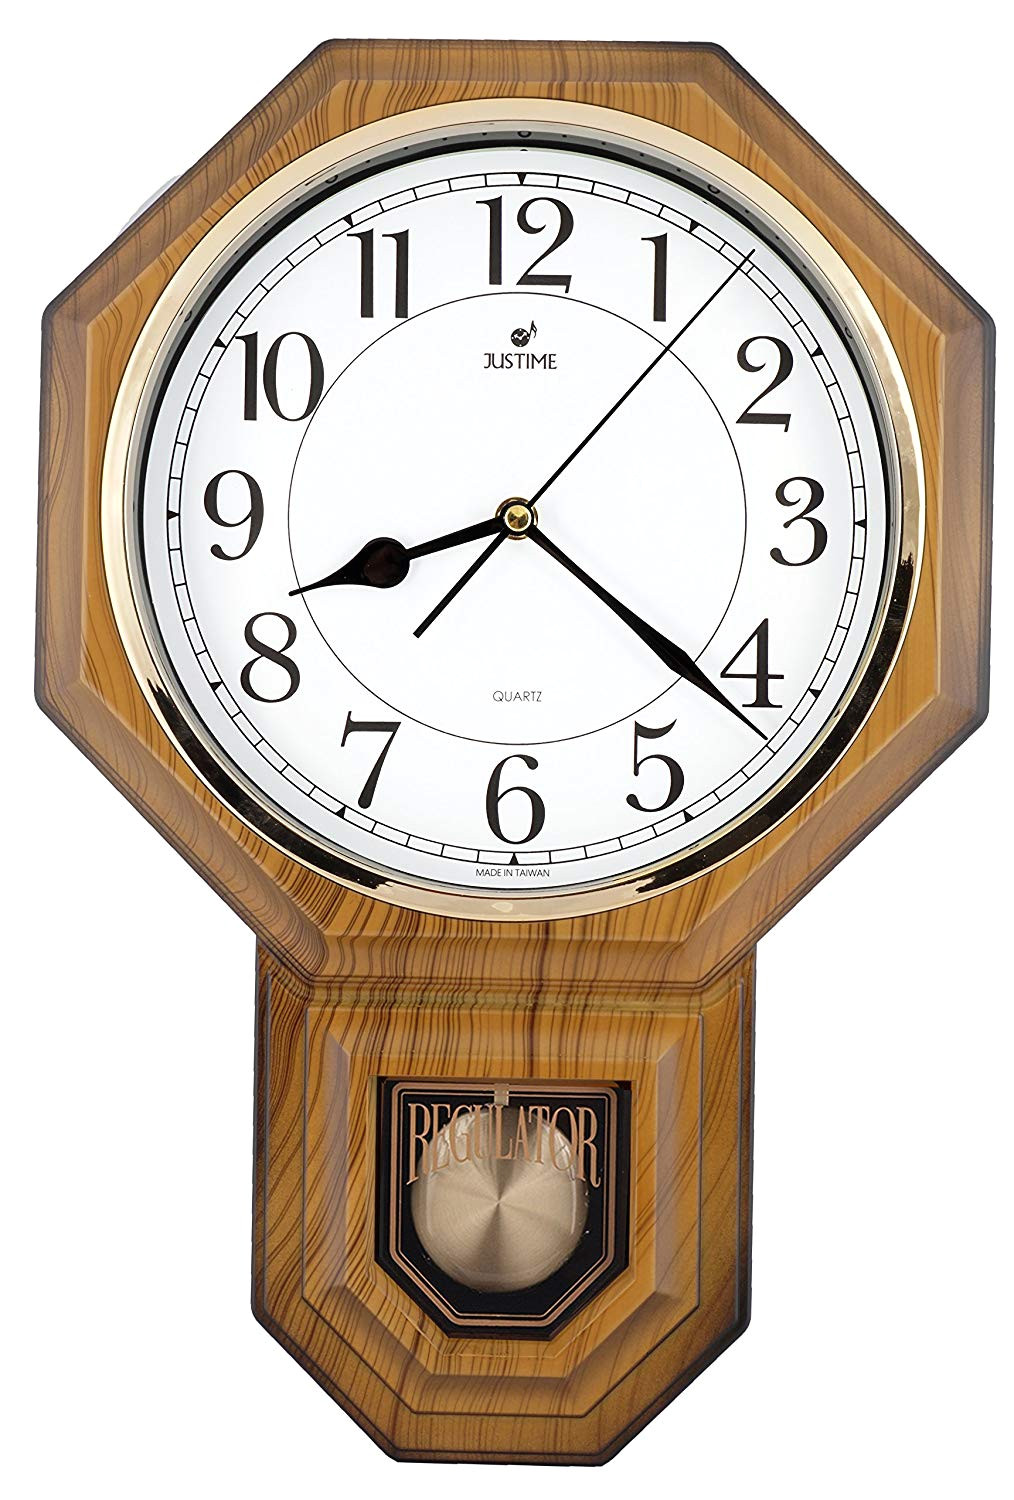 amazon com traditional schoolhouse easy to read pendulum wall clock chimes every hour with westminster melody made in taiwan 4aa batteries included